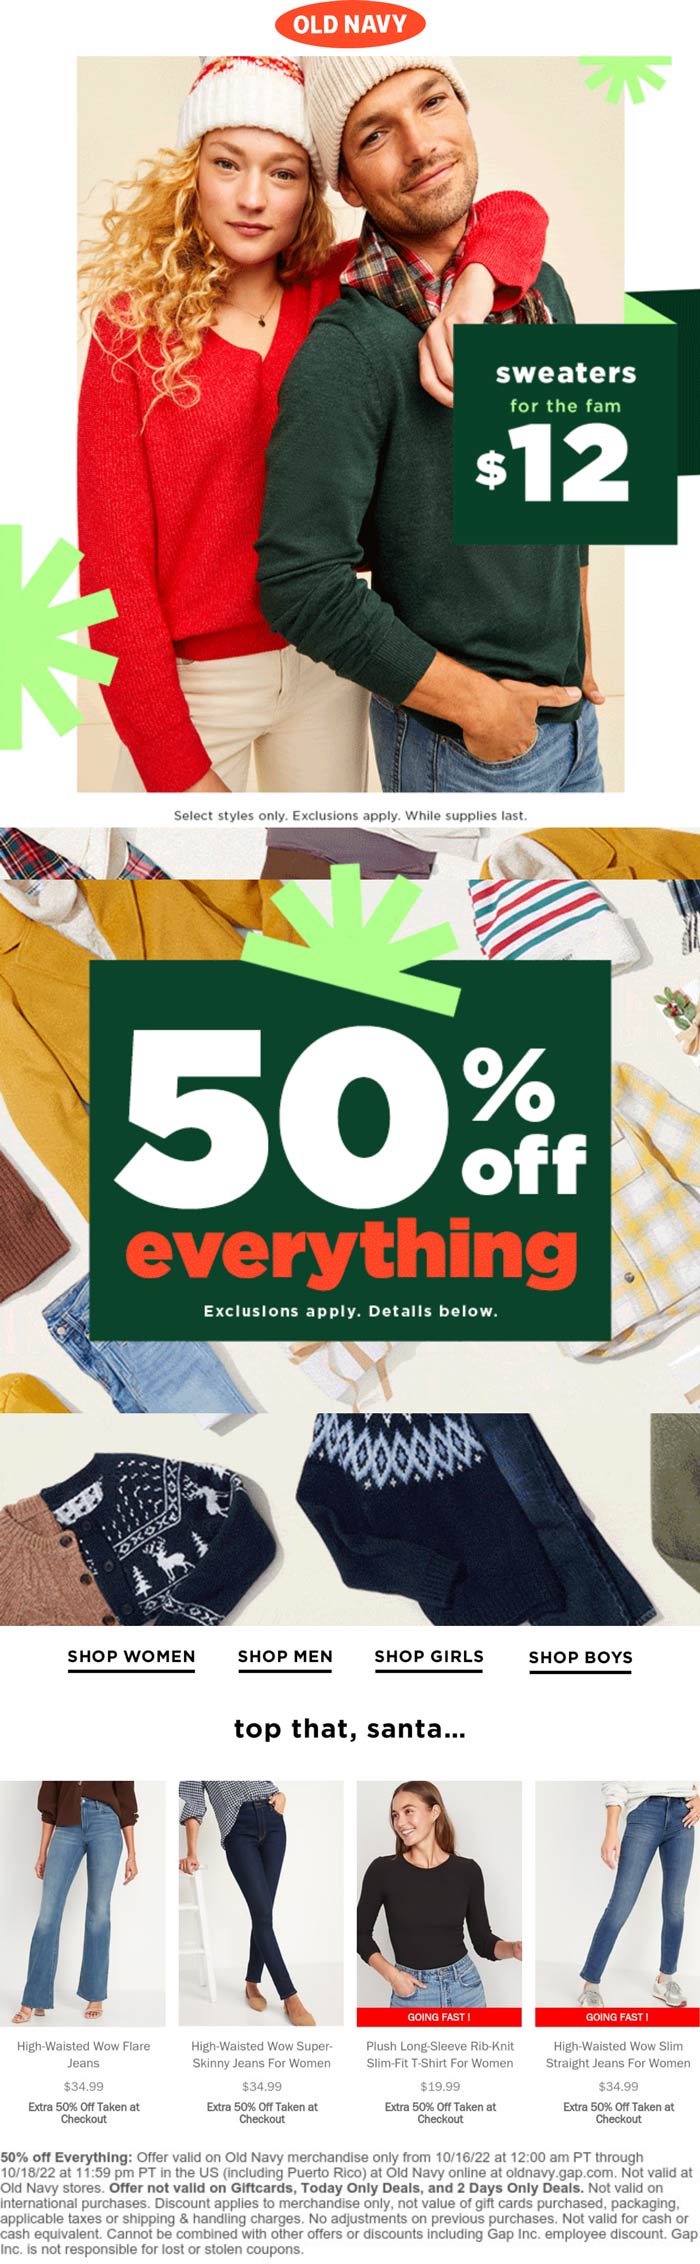 Old Navy stores Coupon  50% off everything online at Old Navy #oldnavy 